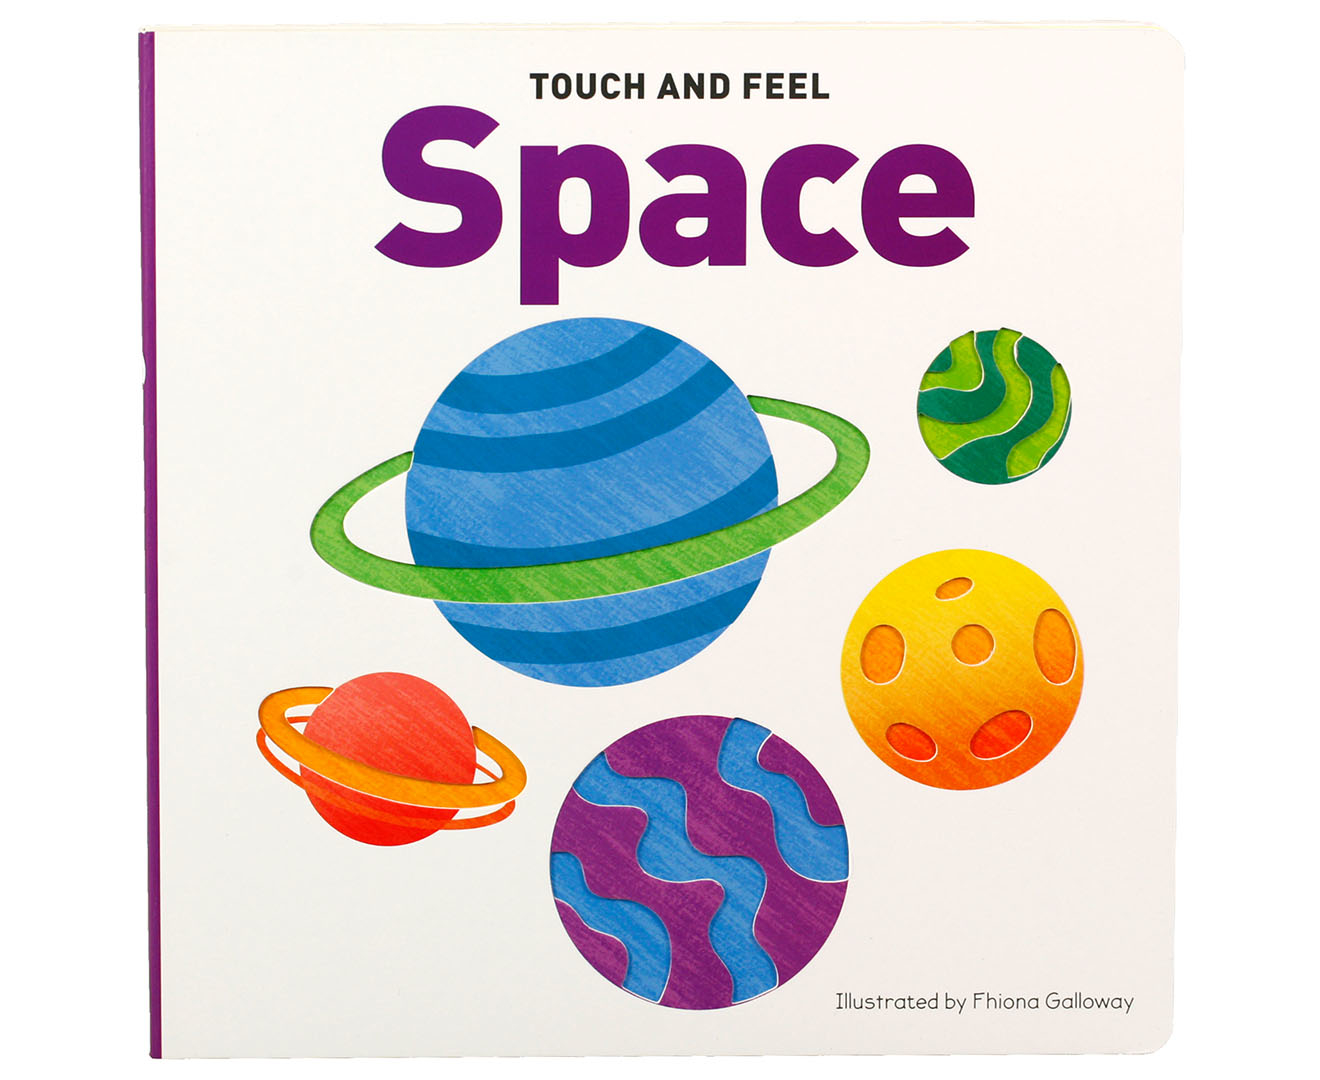 Feeling the space. Touch перевод. Space in one Touch надпись. Touch and feel. Touch the Cosmos.